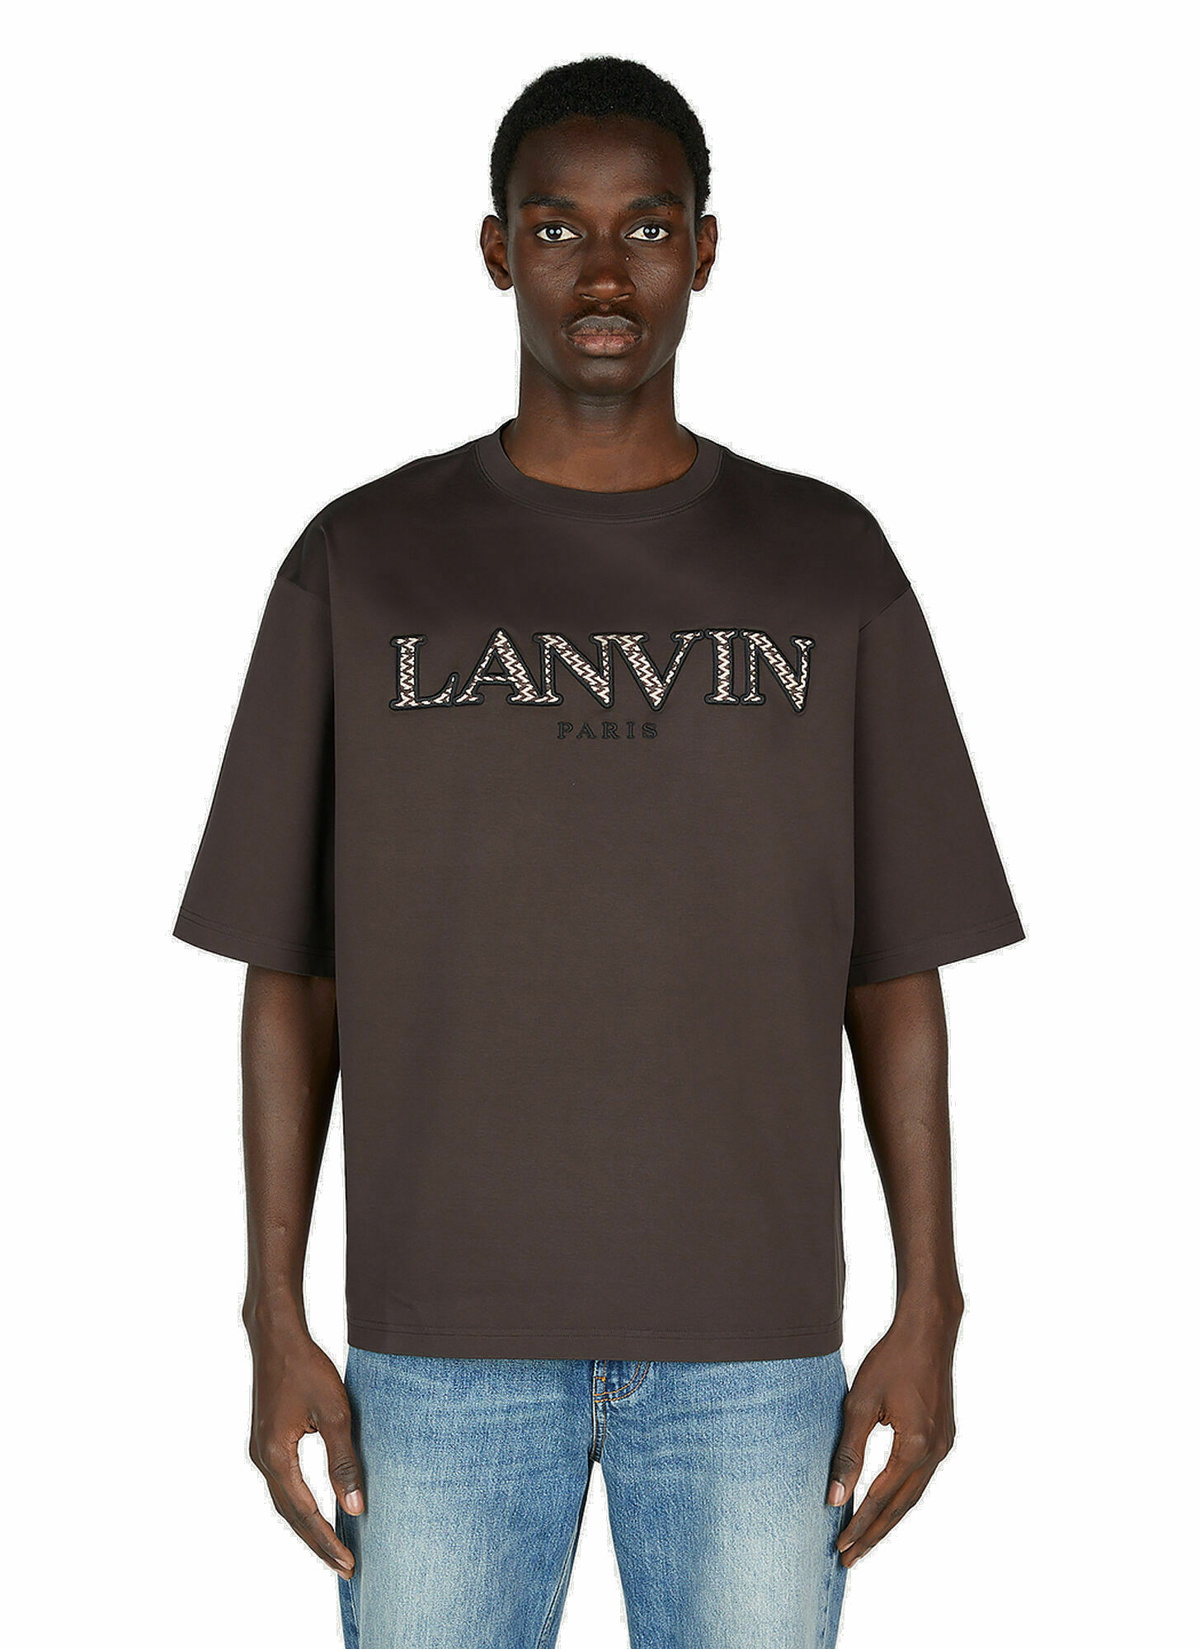 Lanvin - Logo Embroidery T-Shirt in Brown Lanvin